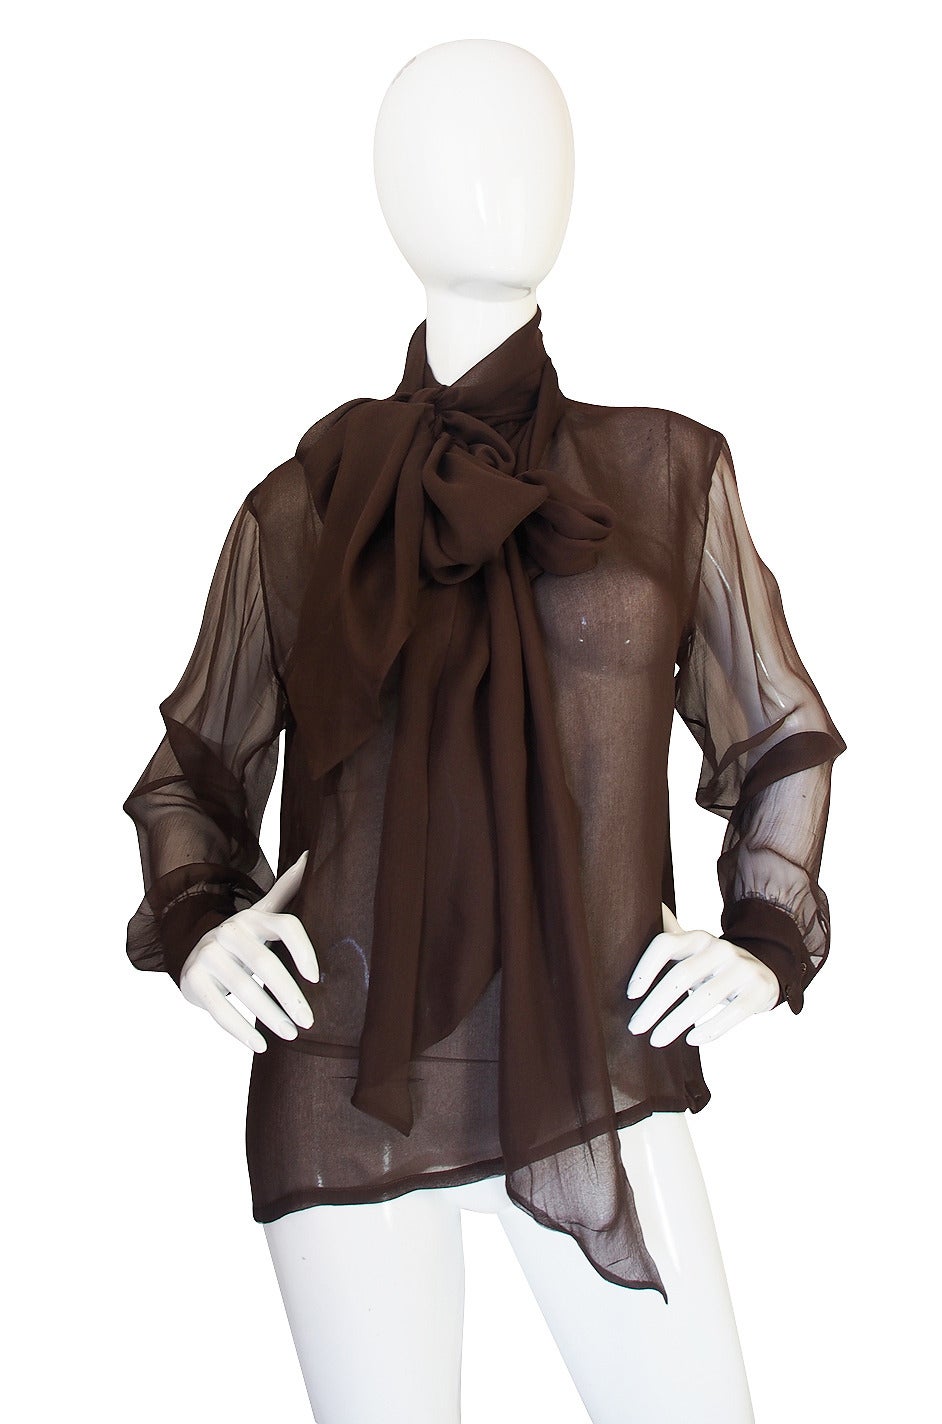 This Yves silk chiffon top is a beauty. The cut is loose and easy and the fabric a very fine silk chiffon that is a semi-transparent milk chocolate color. Each sleeve is cut to puff slightly above the two button cuffs. The attached tie at the neck